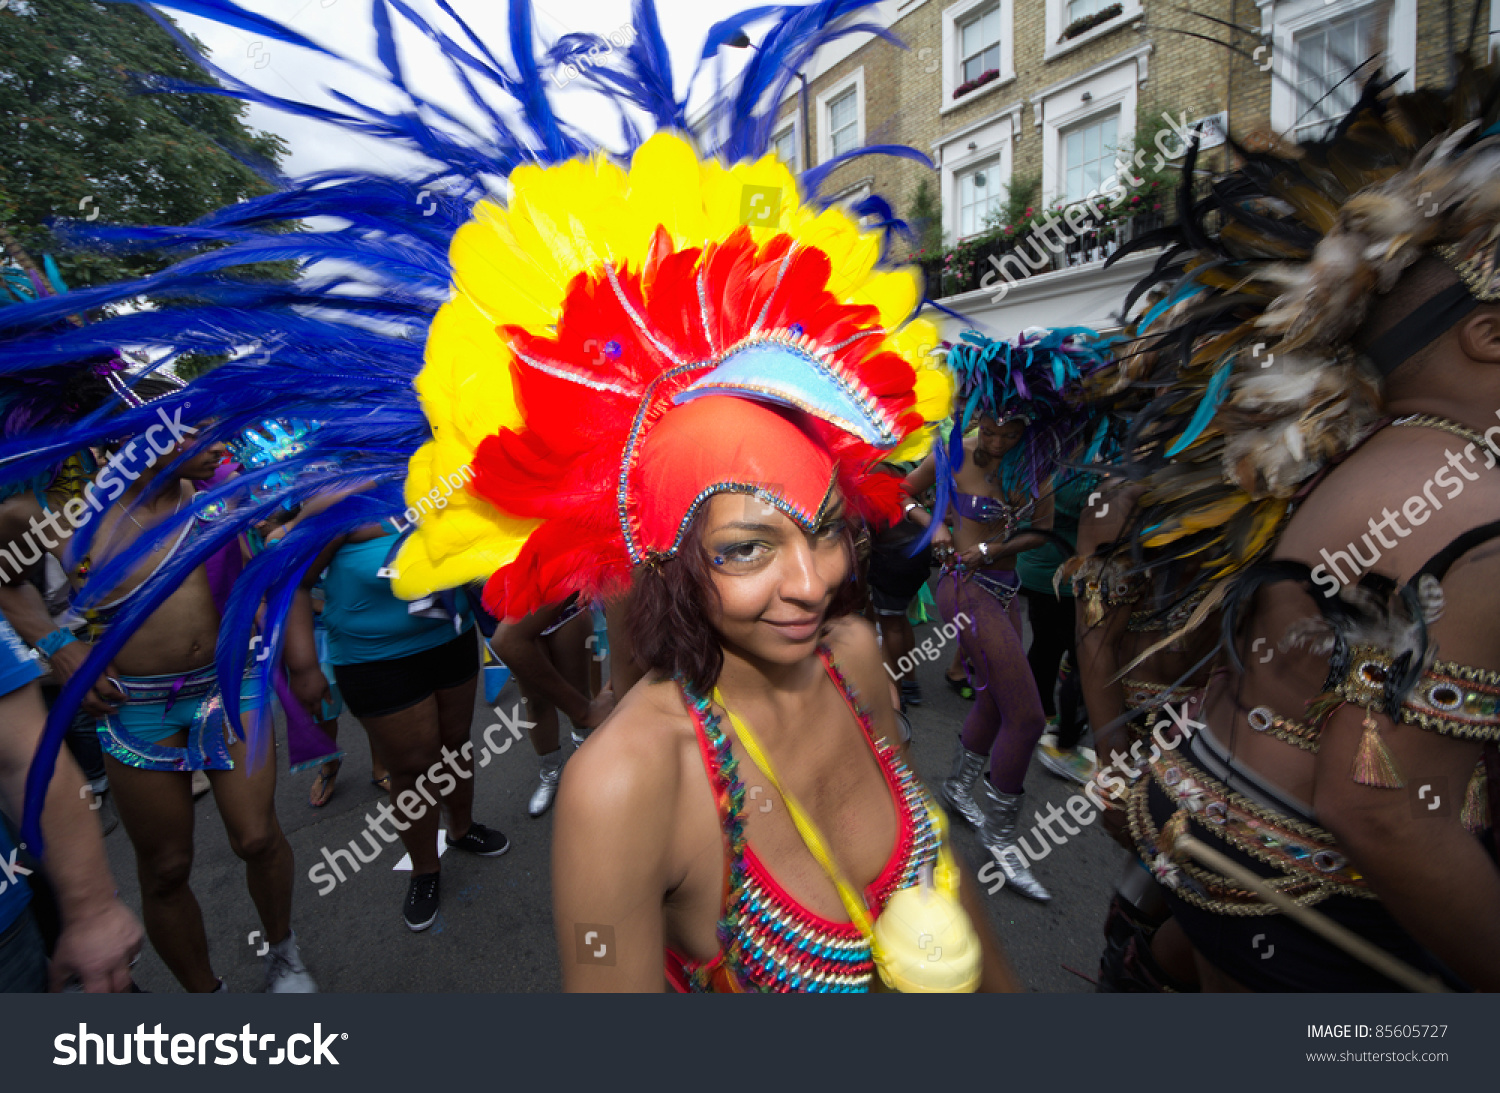 London - Aug 29: Performer Takes Part In The Notting Hill Carnival On ...